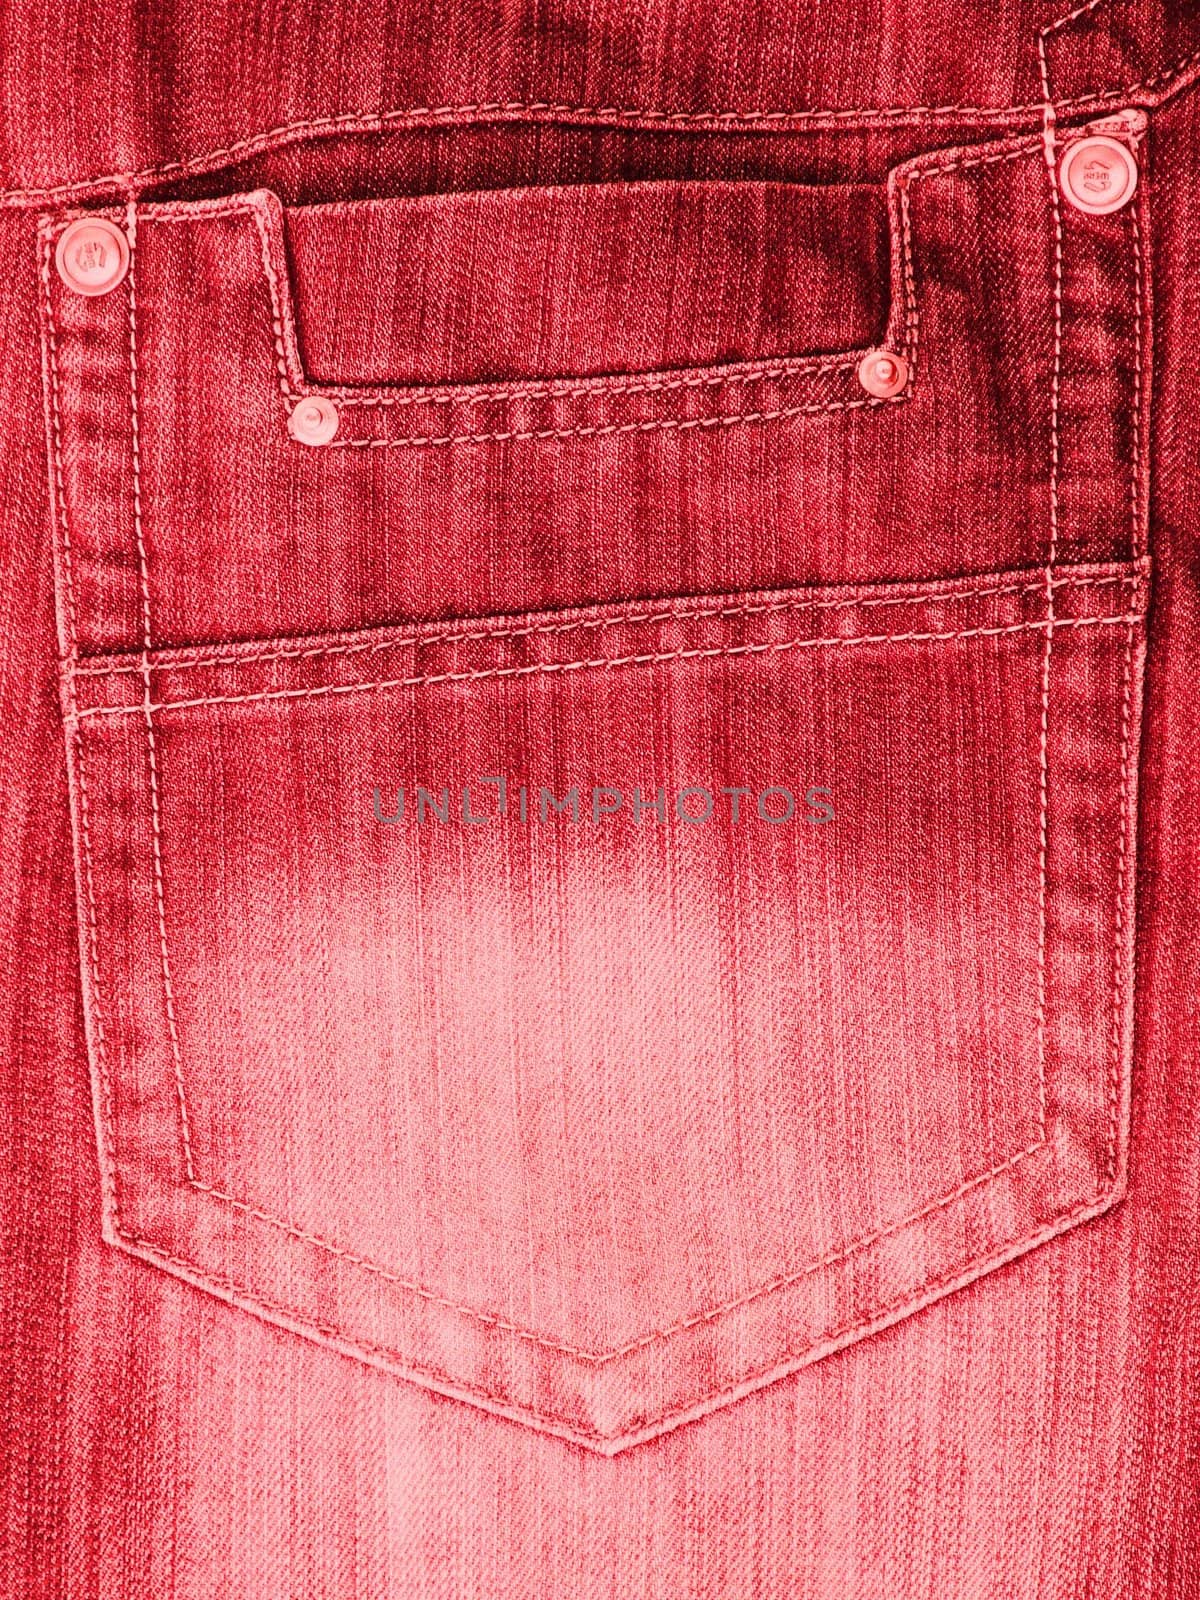 Jeans background by alex281973